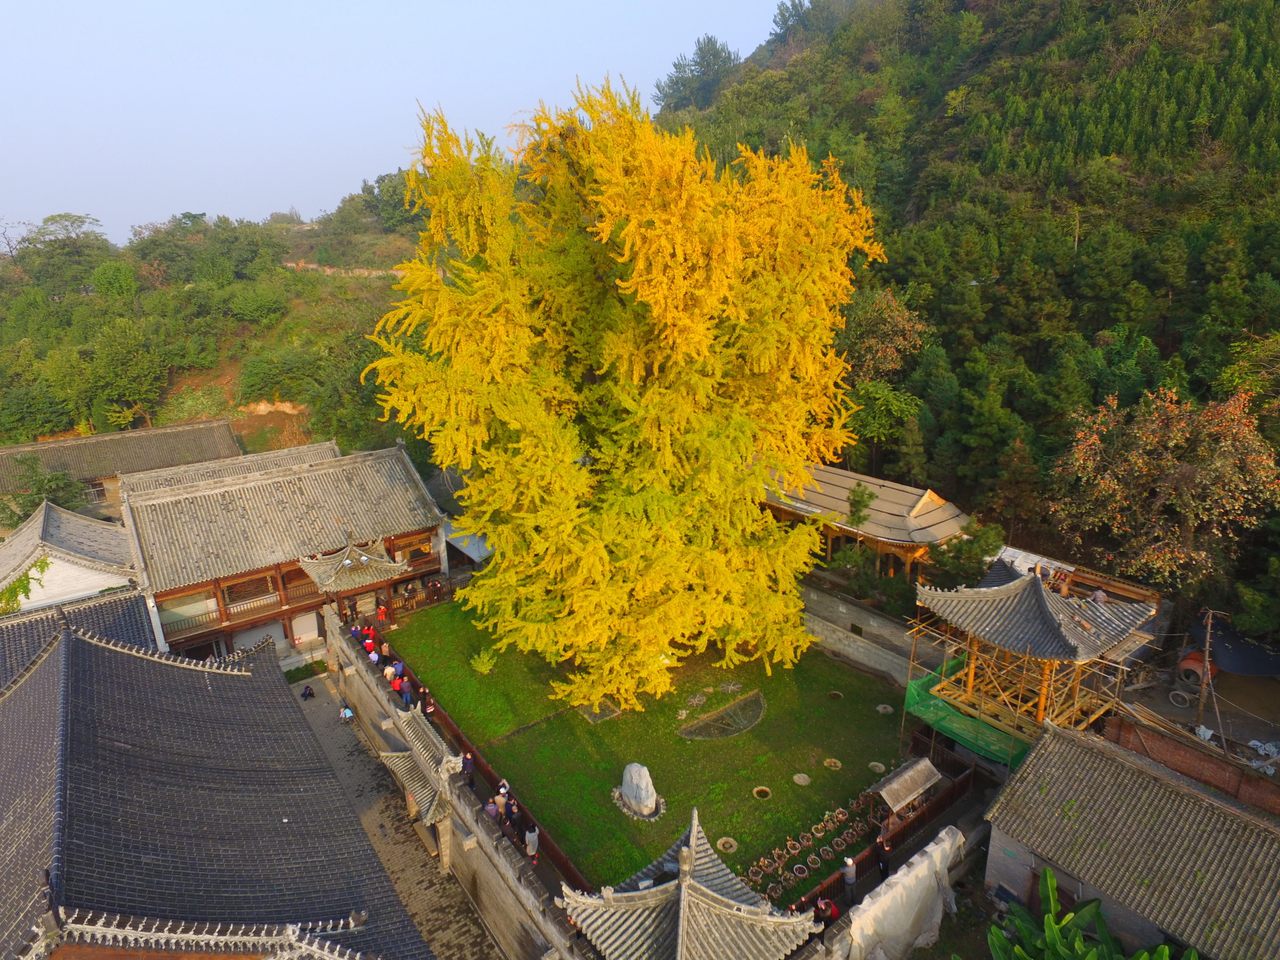 This Xi'an temple ginkgo is more than a thousand years old.
